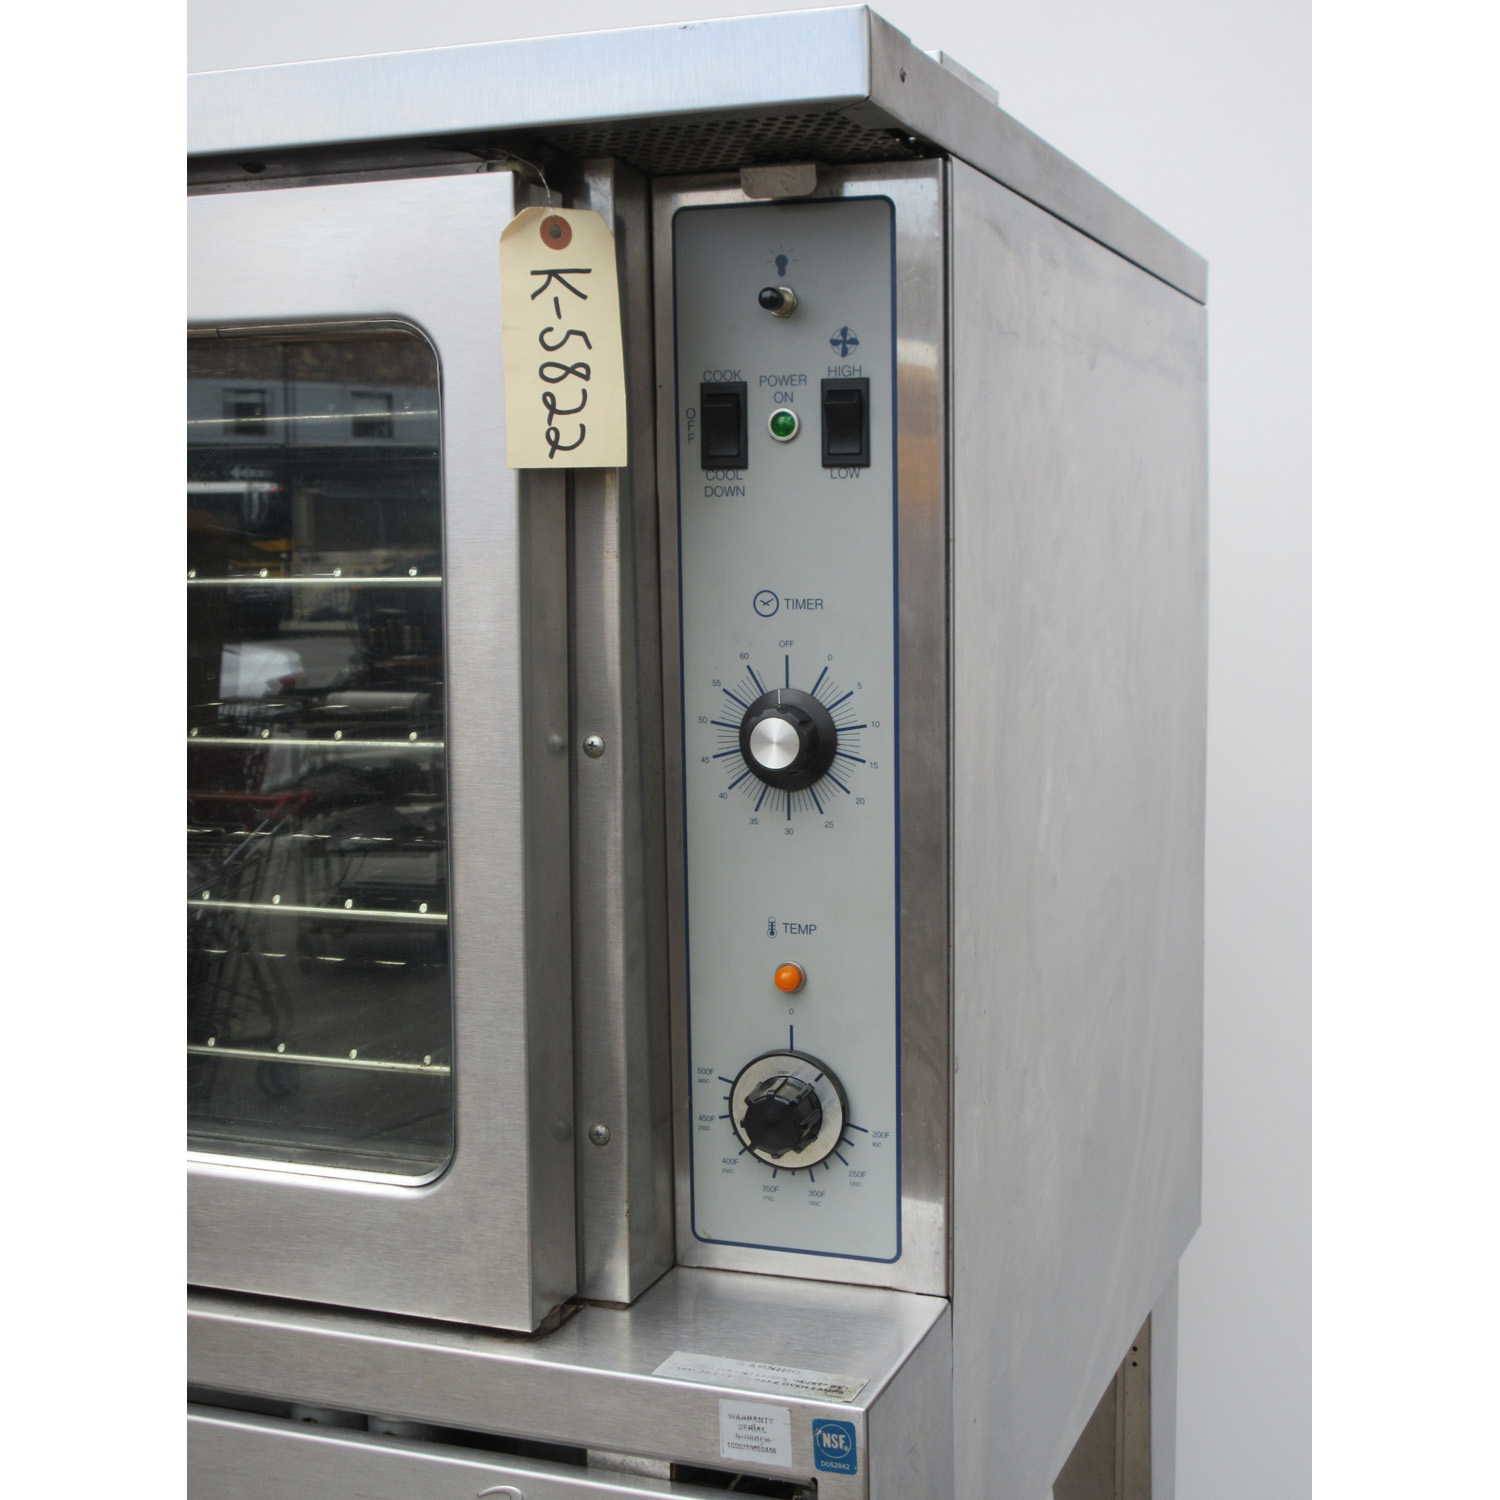 Sunfire SDG-1 Convection Gas Oven, Used Great Condition image 2